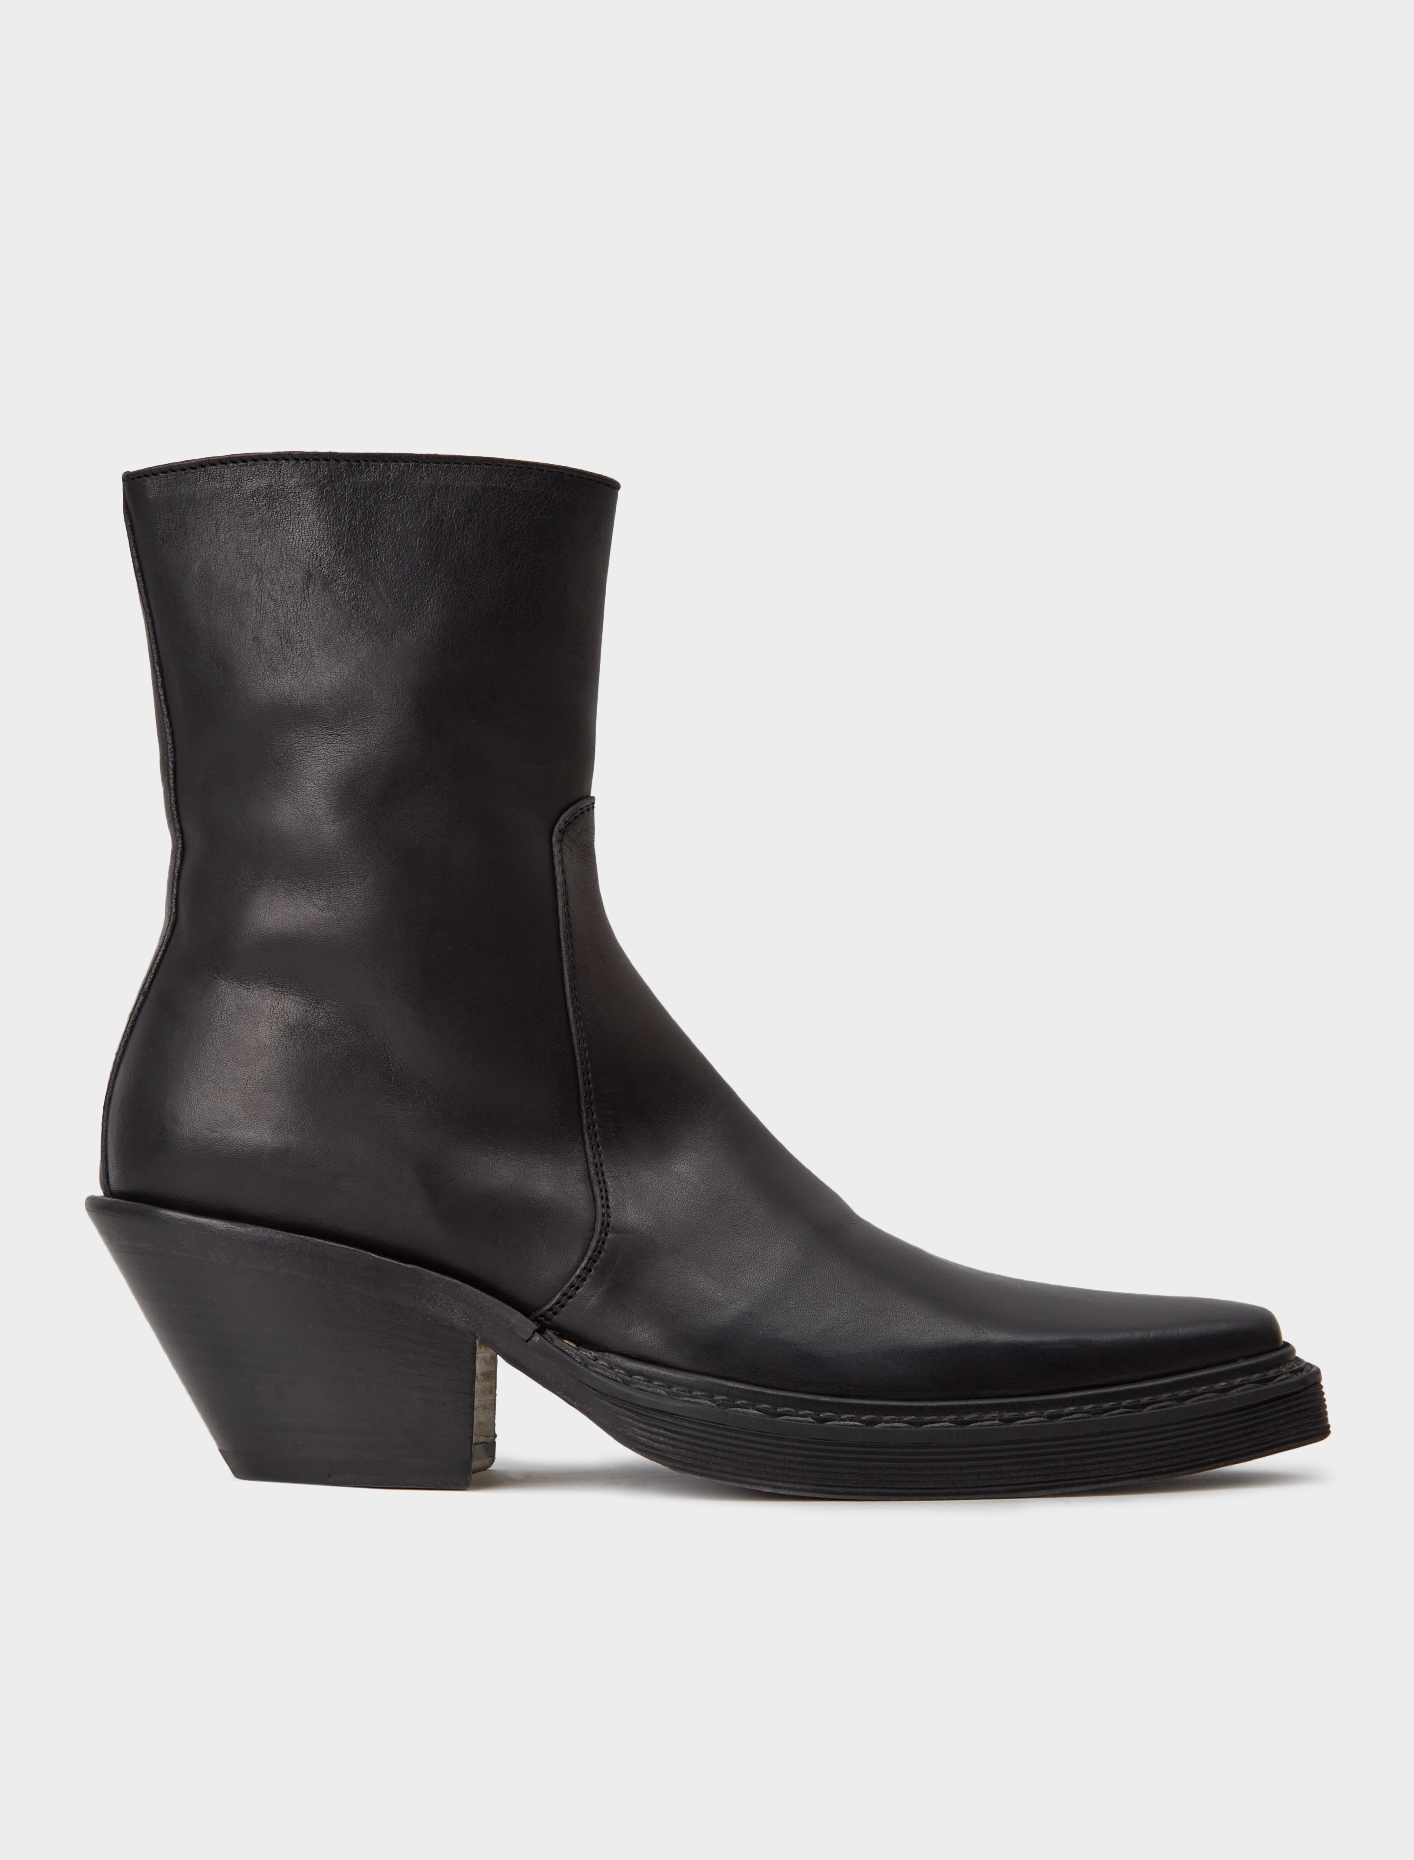 Acne Studios Leather Ankle Boots in Black | Voo Store Berlin ...